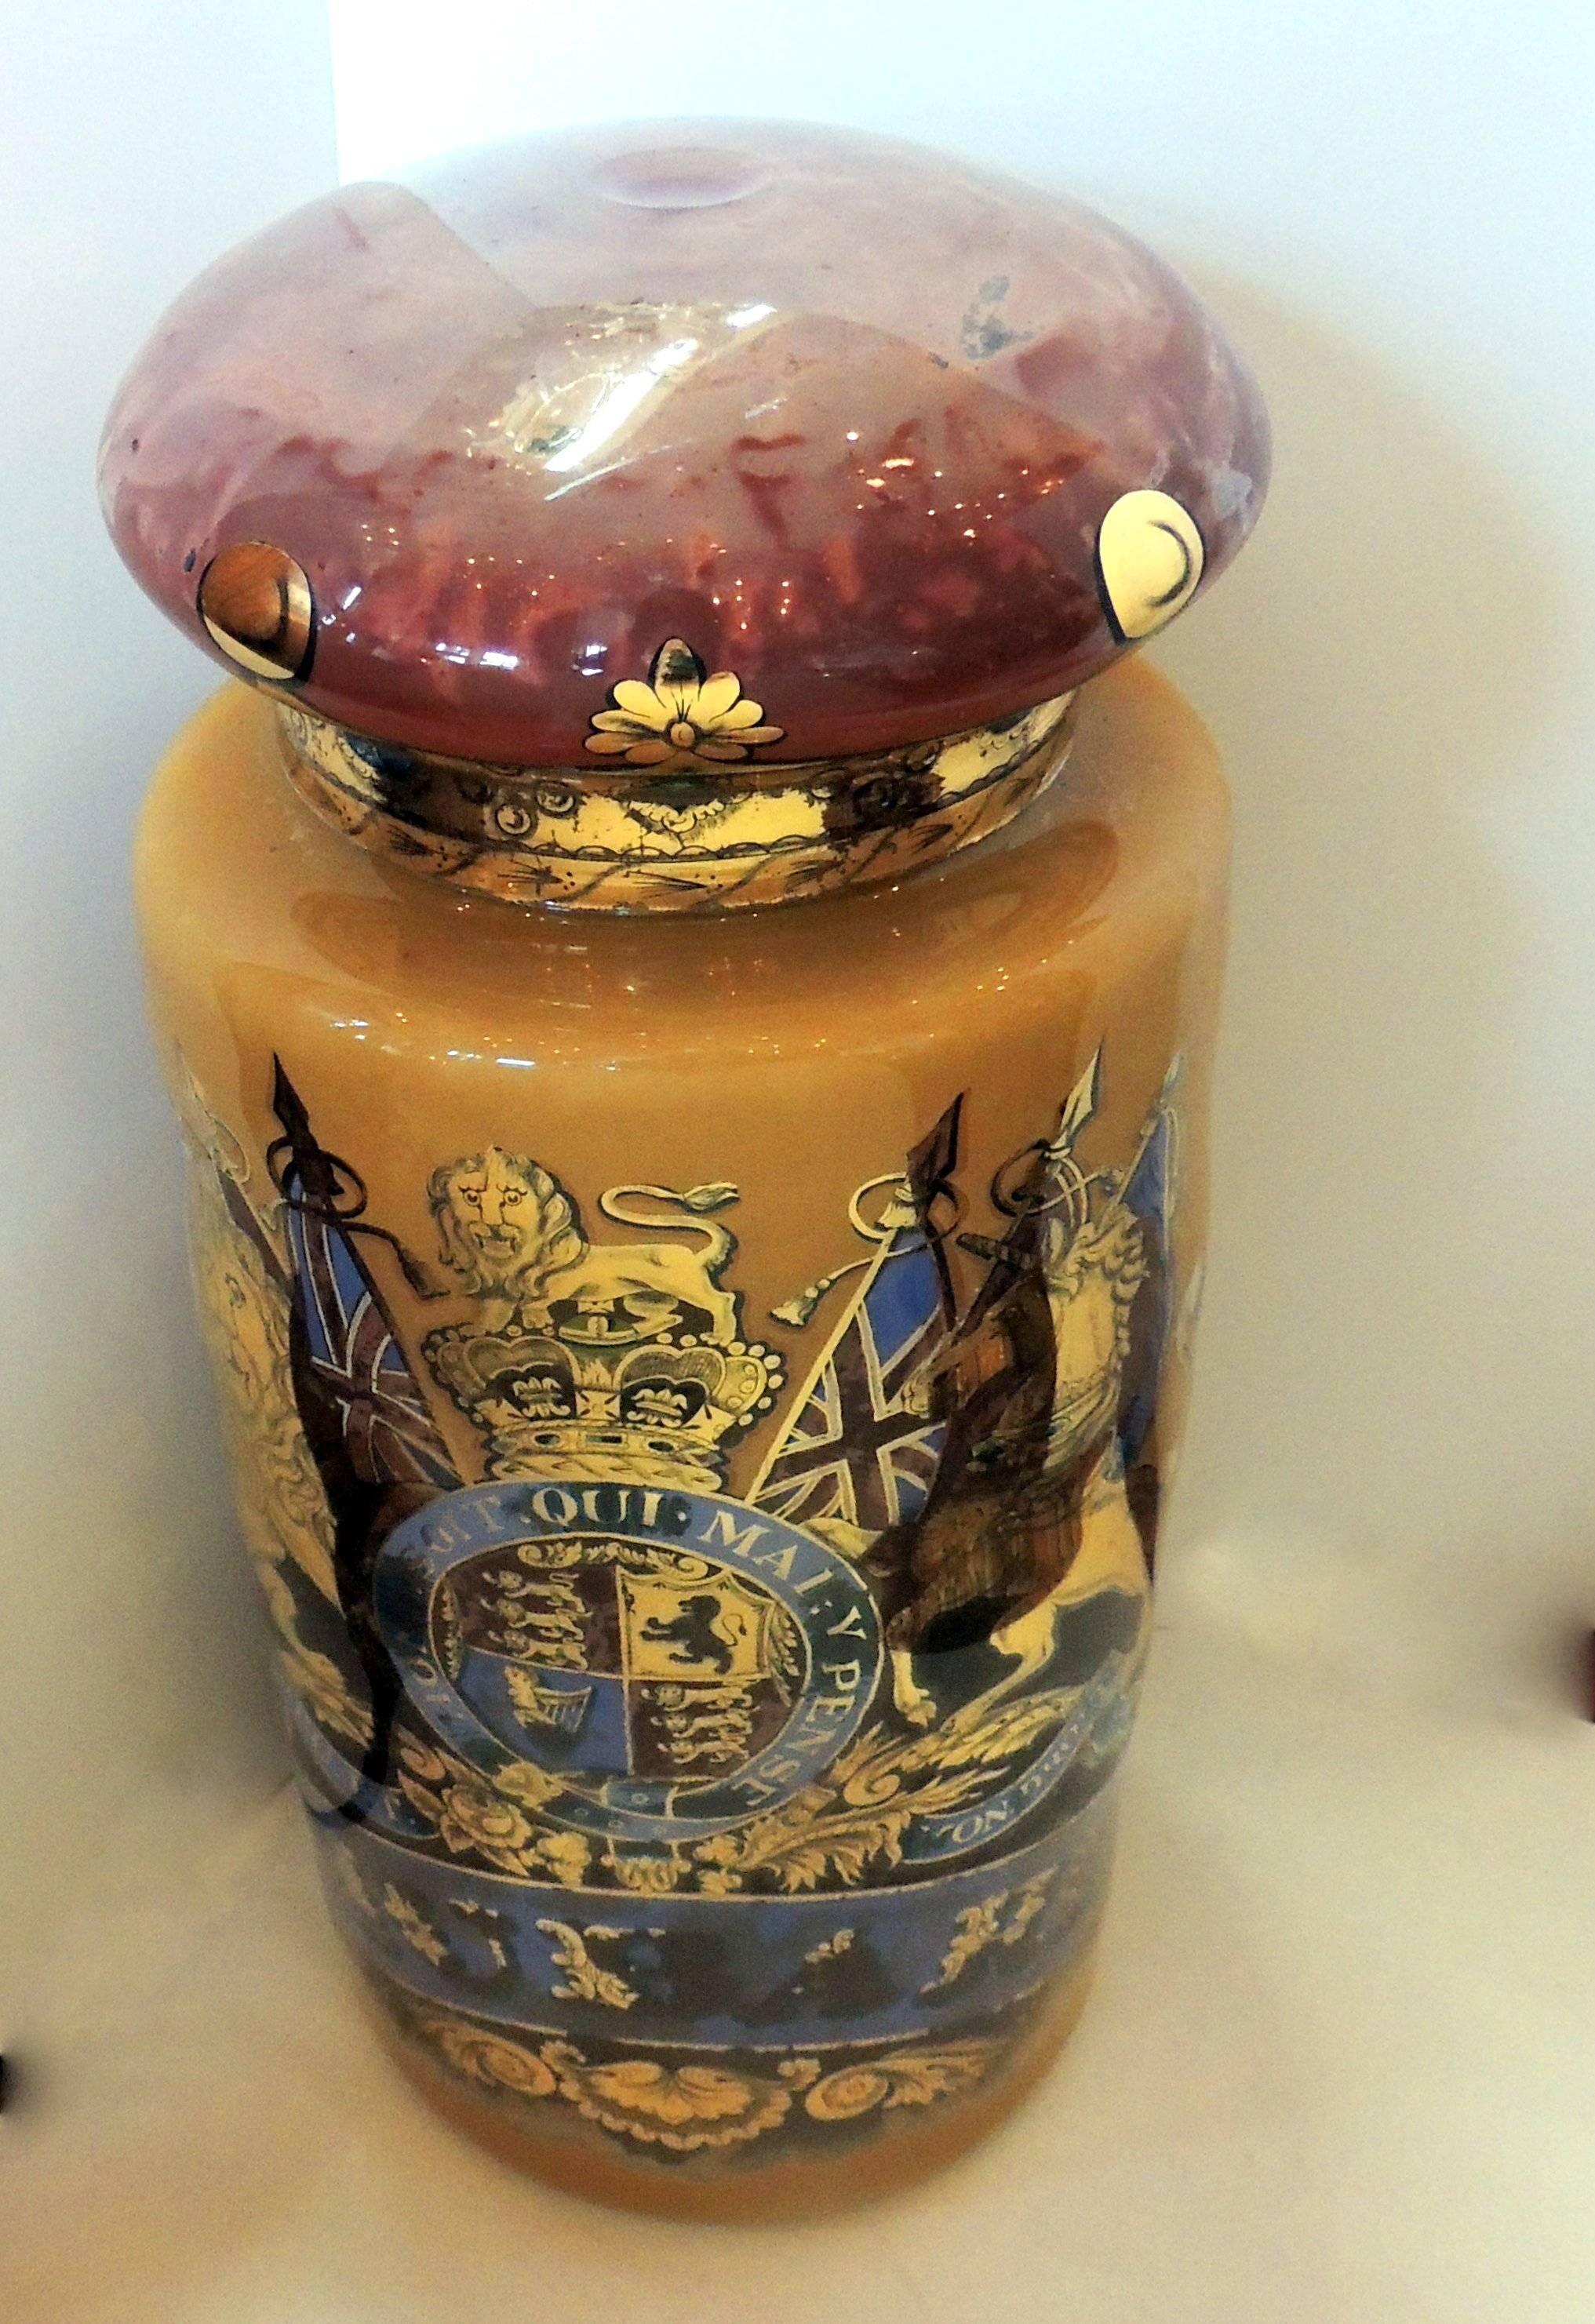 Vintage pharmacy blown glass apothecary jar reverse hand-painted.

Gold colors with flags, lion and unicorn. Top is red color with gilt leaves surrounding edge.

